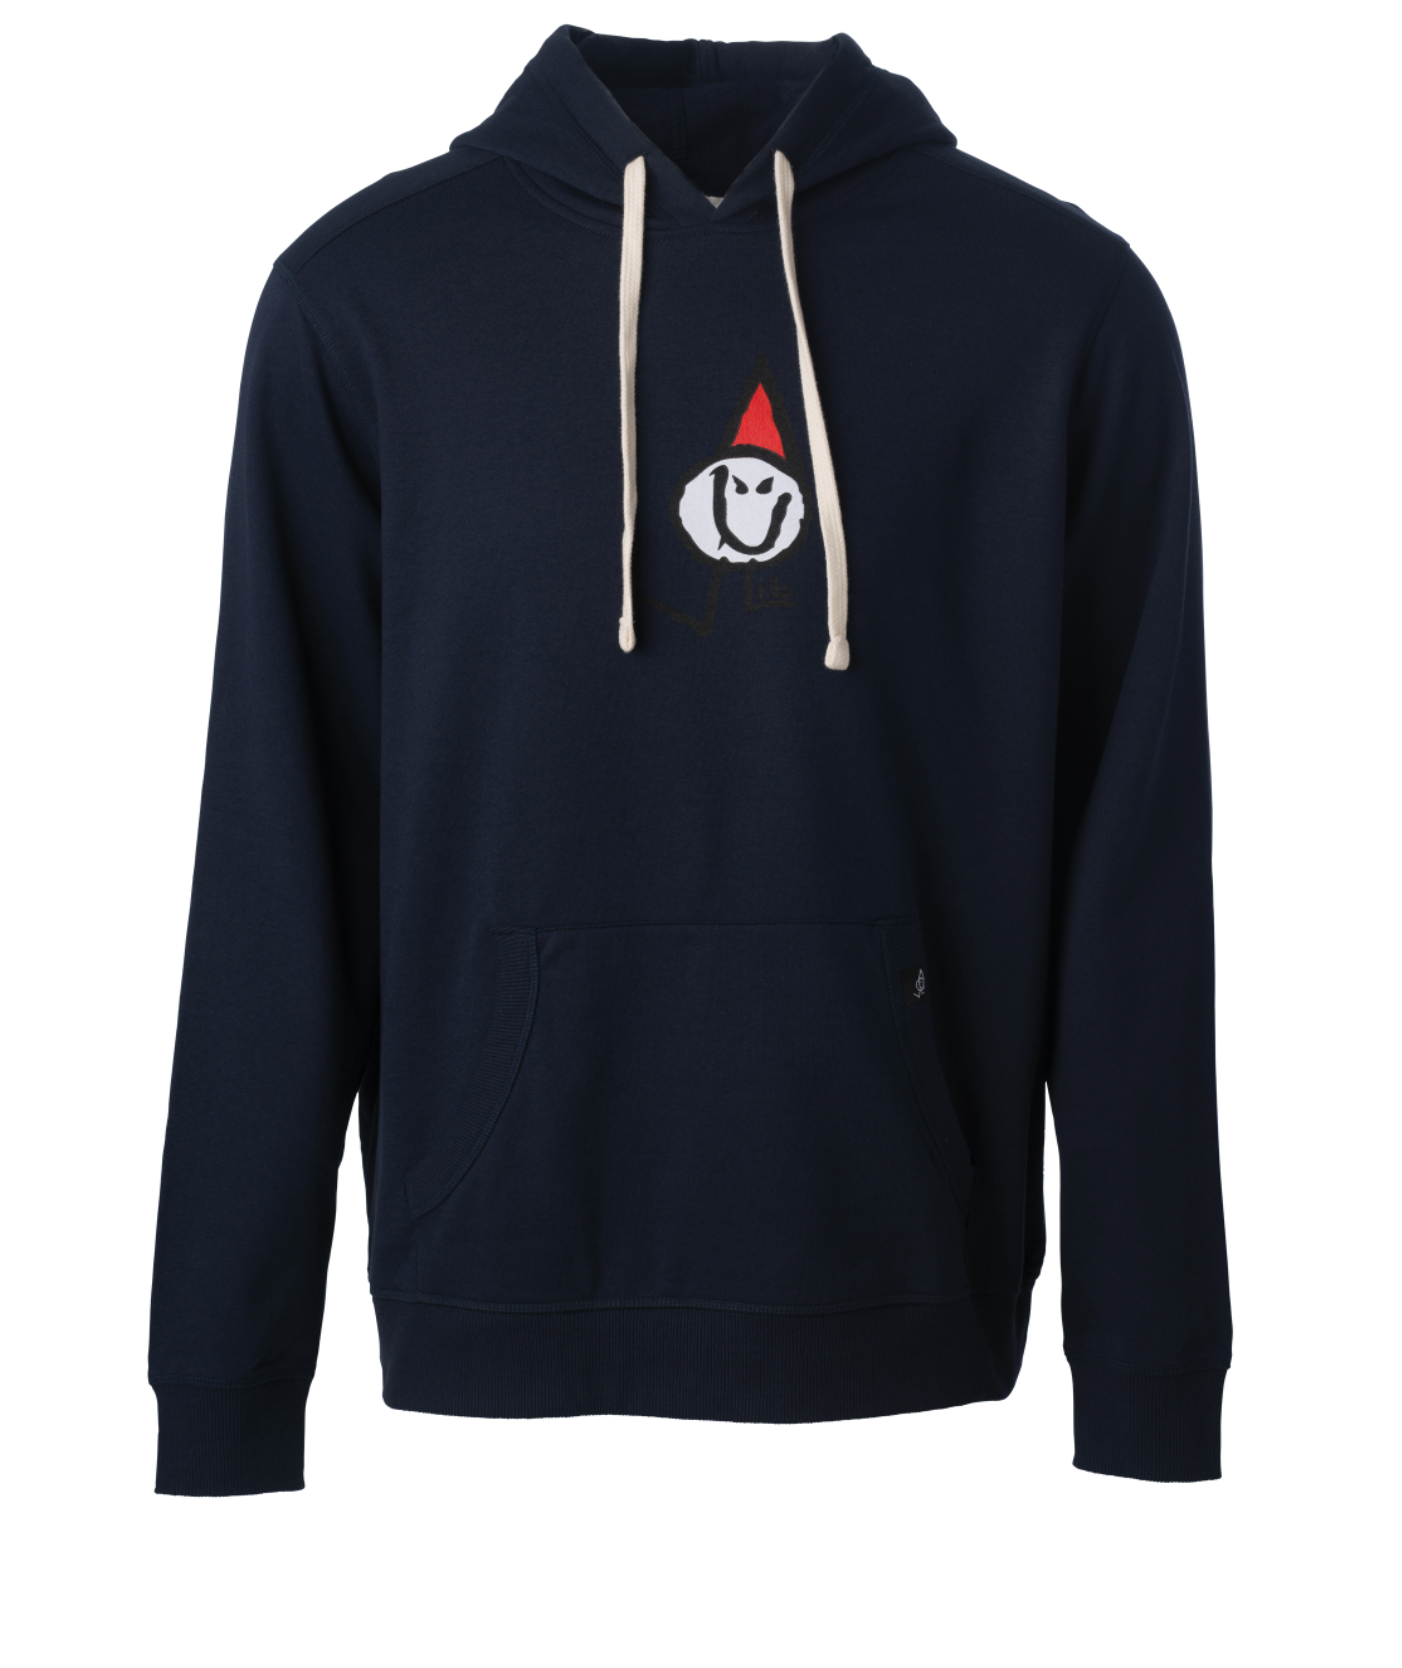 Lib Tech Poly Hooded Pull Over Navy